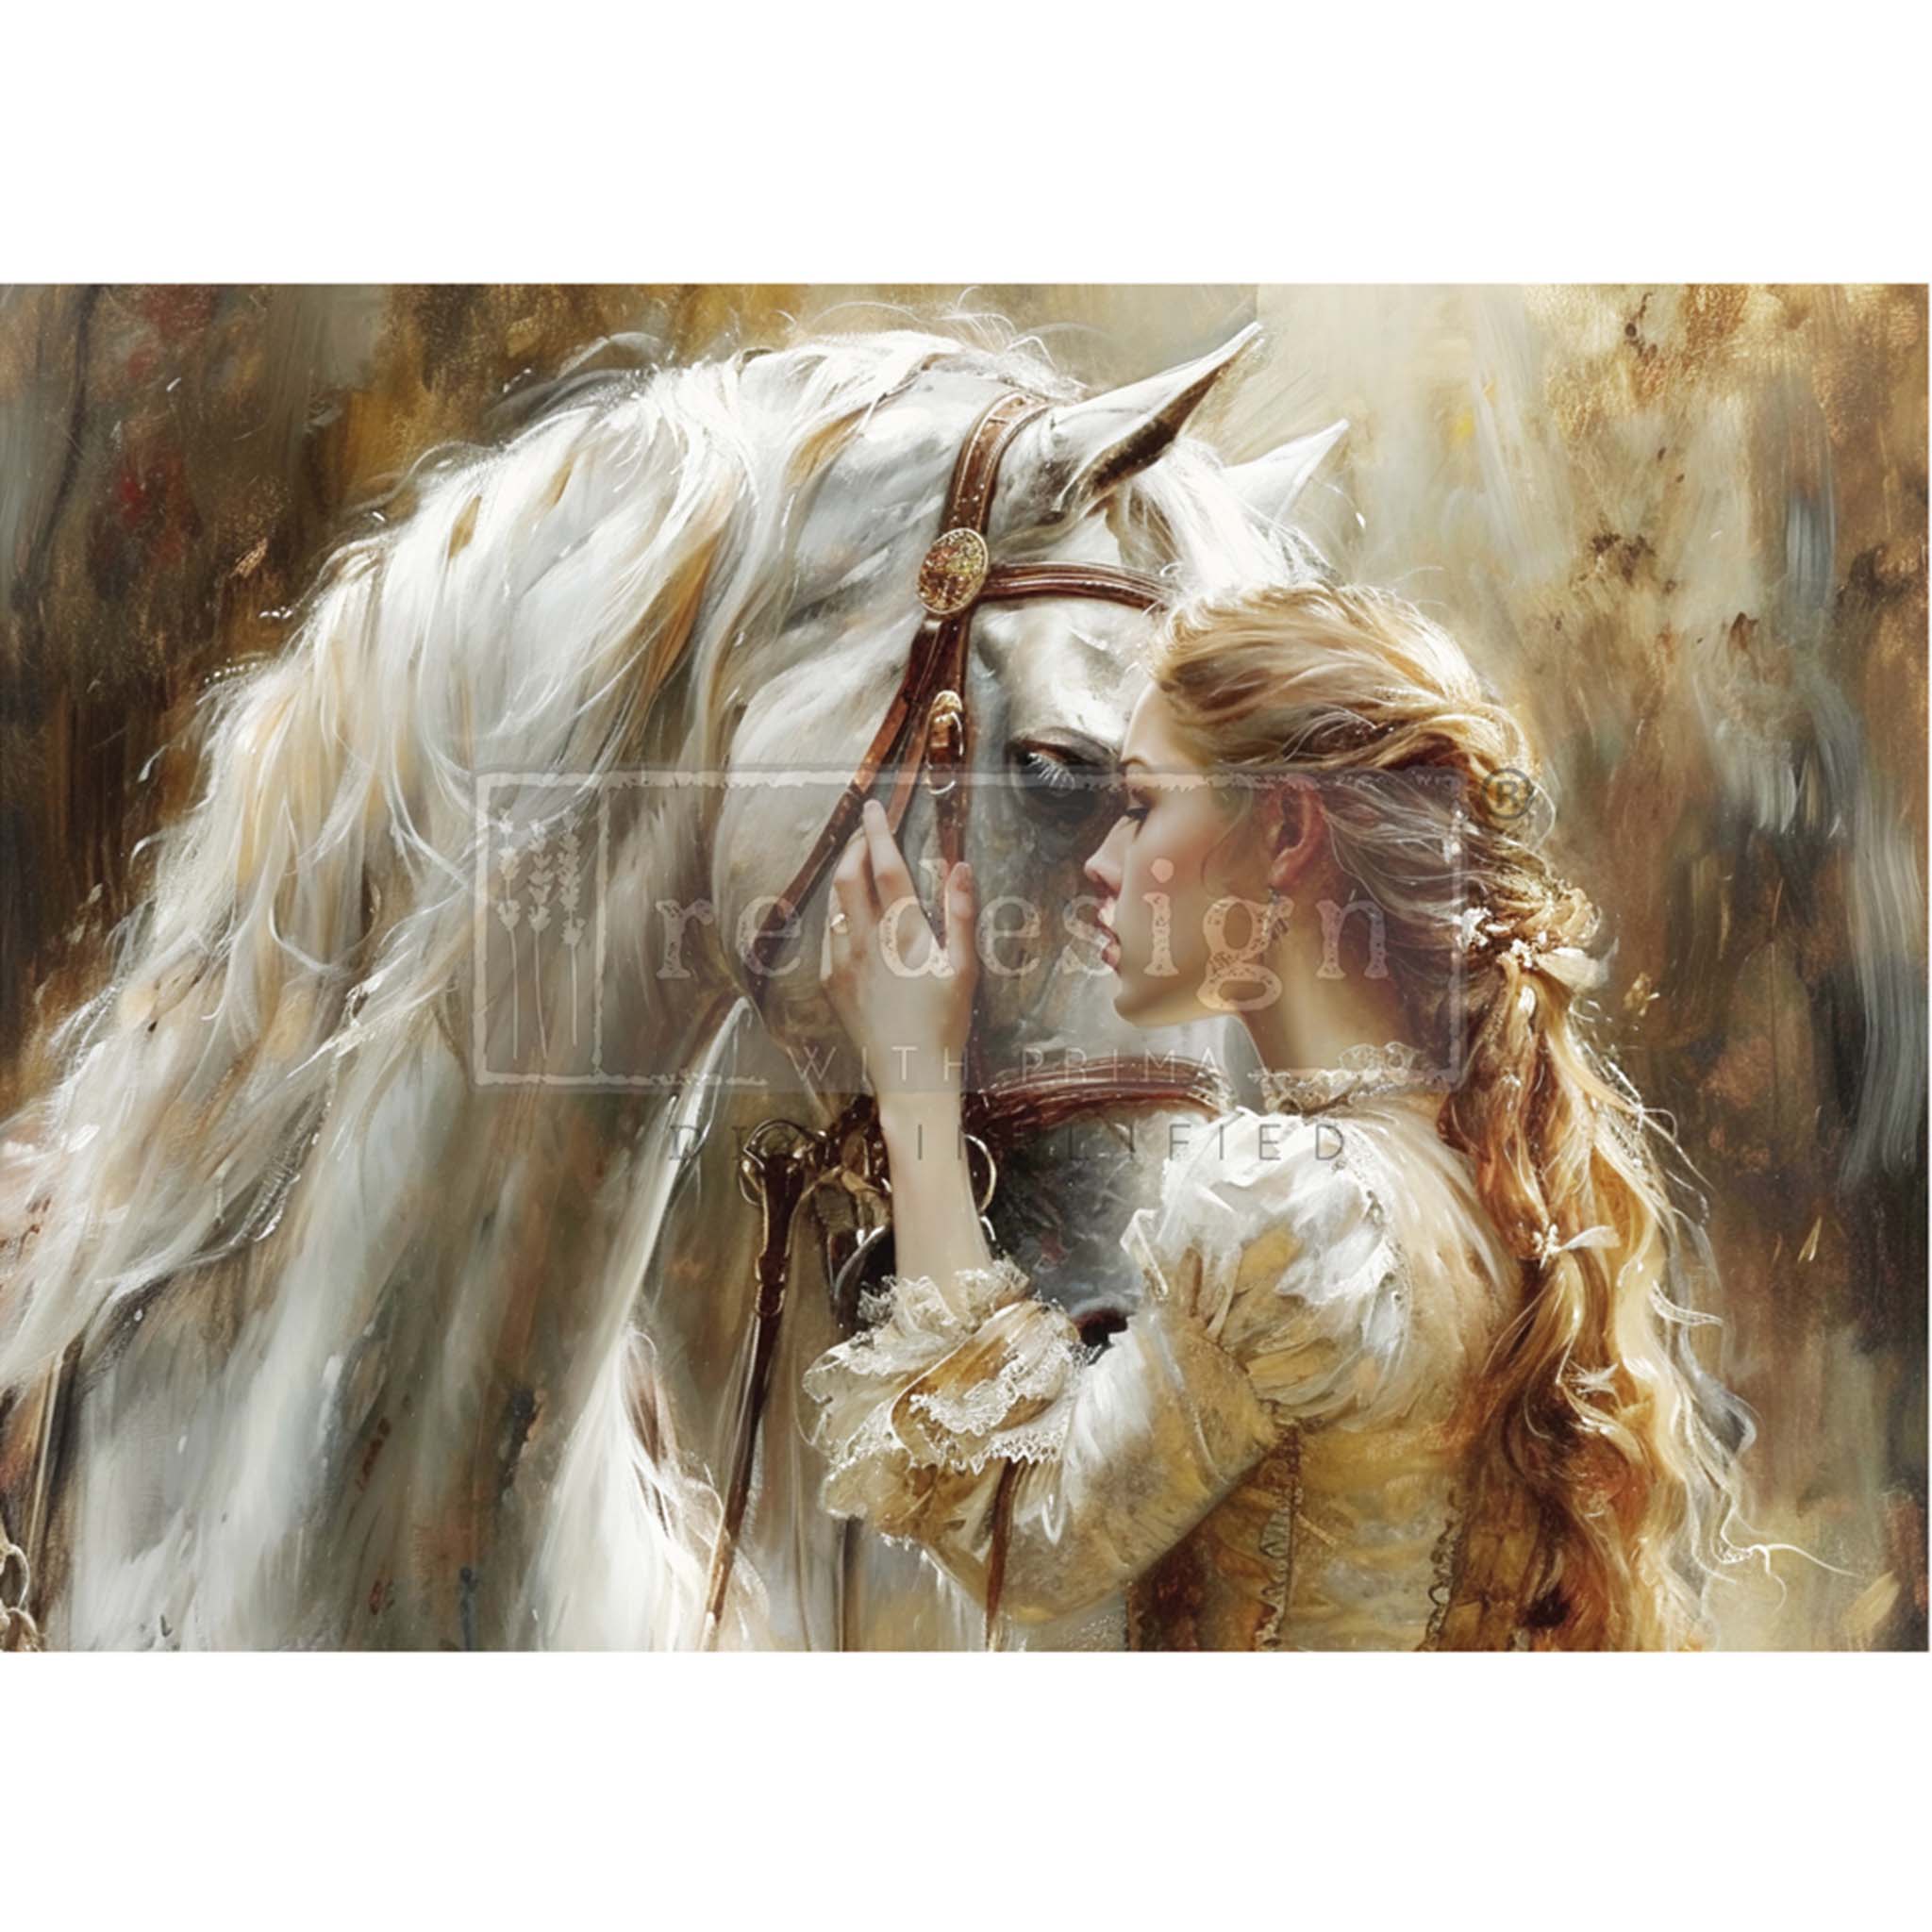 A1 fiber paper design featuring a royally dressed woman caressing a stunning white horse. White borders are on the top and bottom.